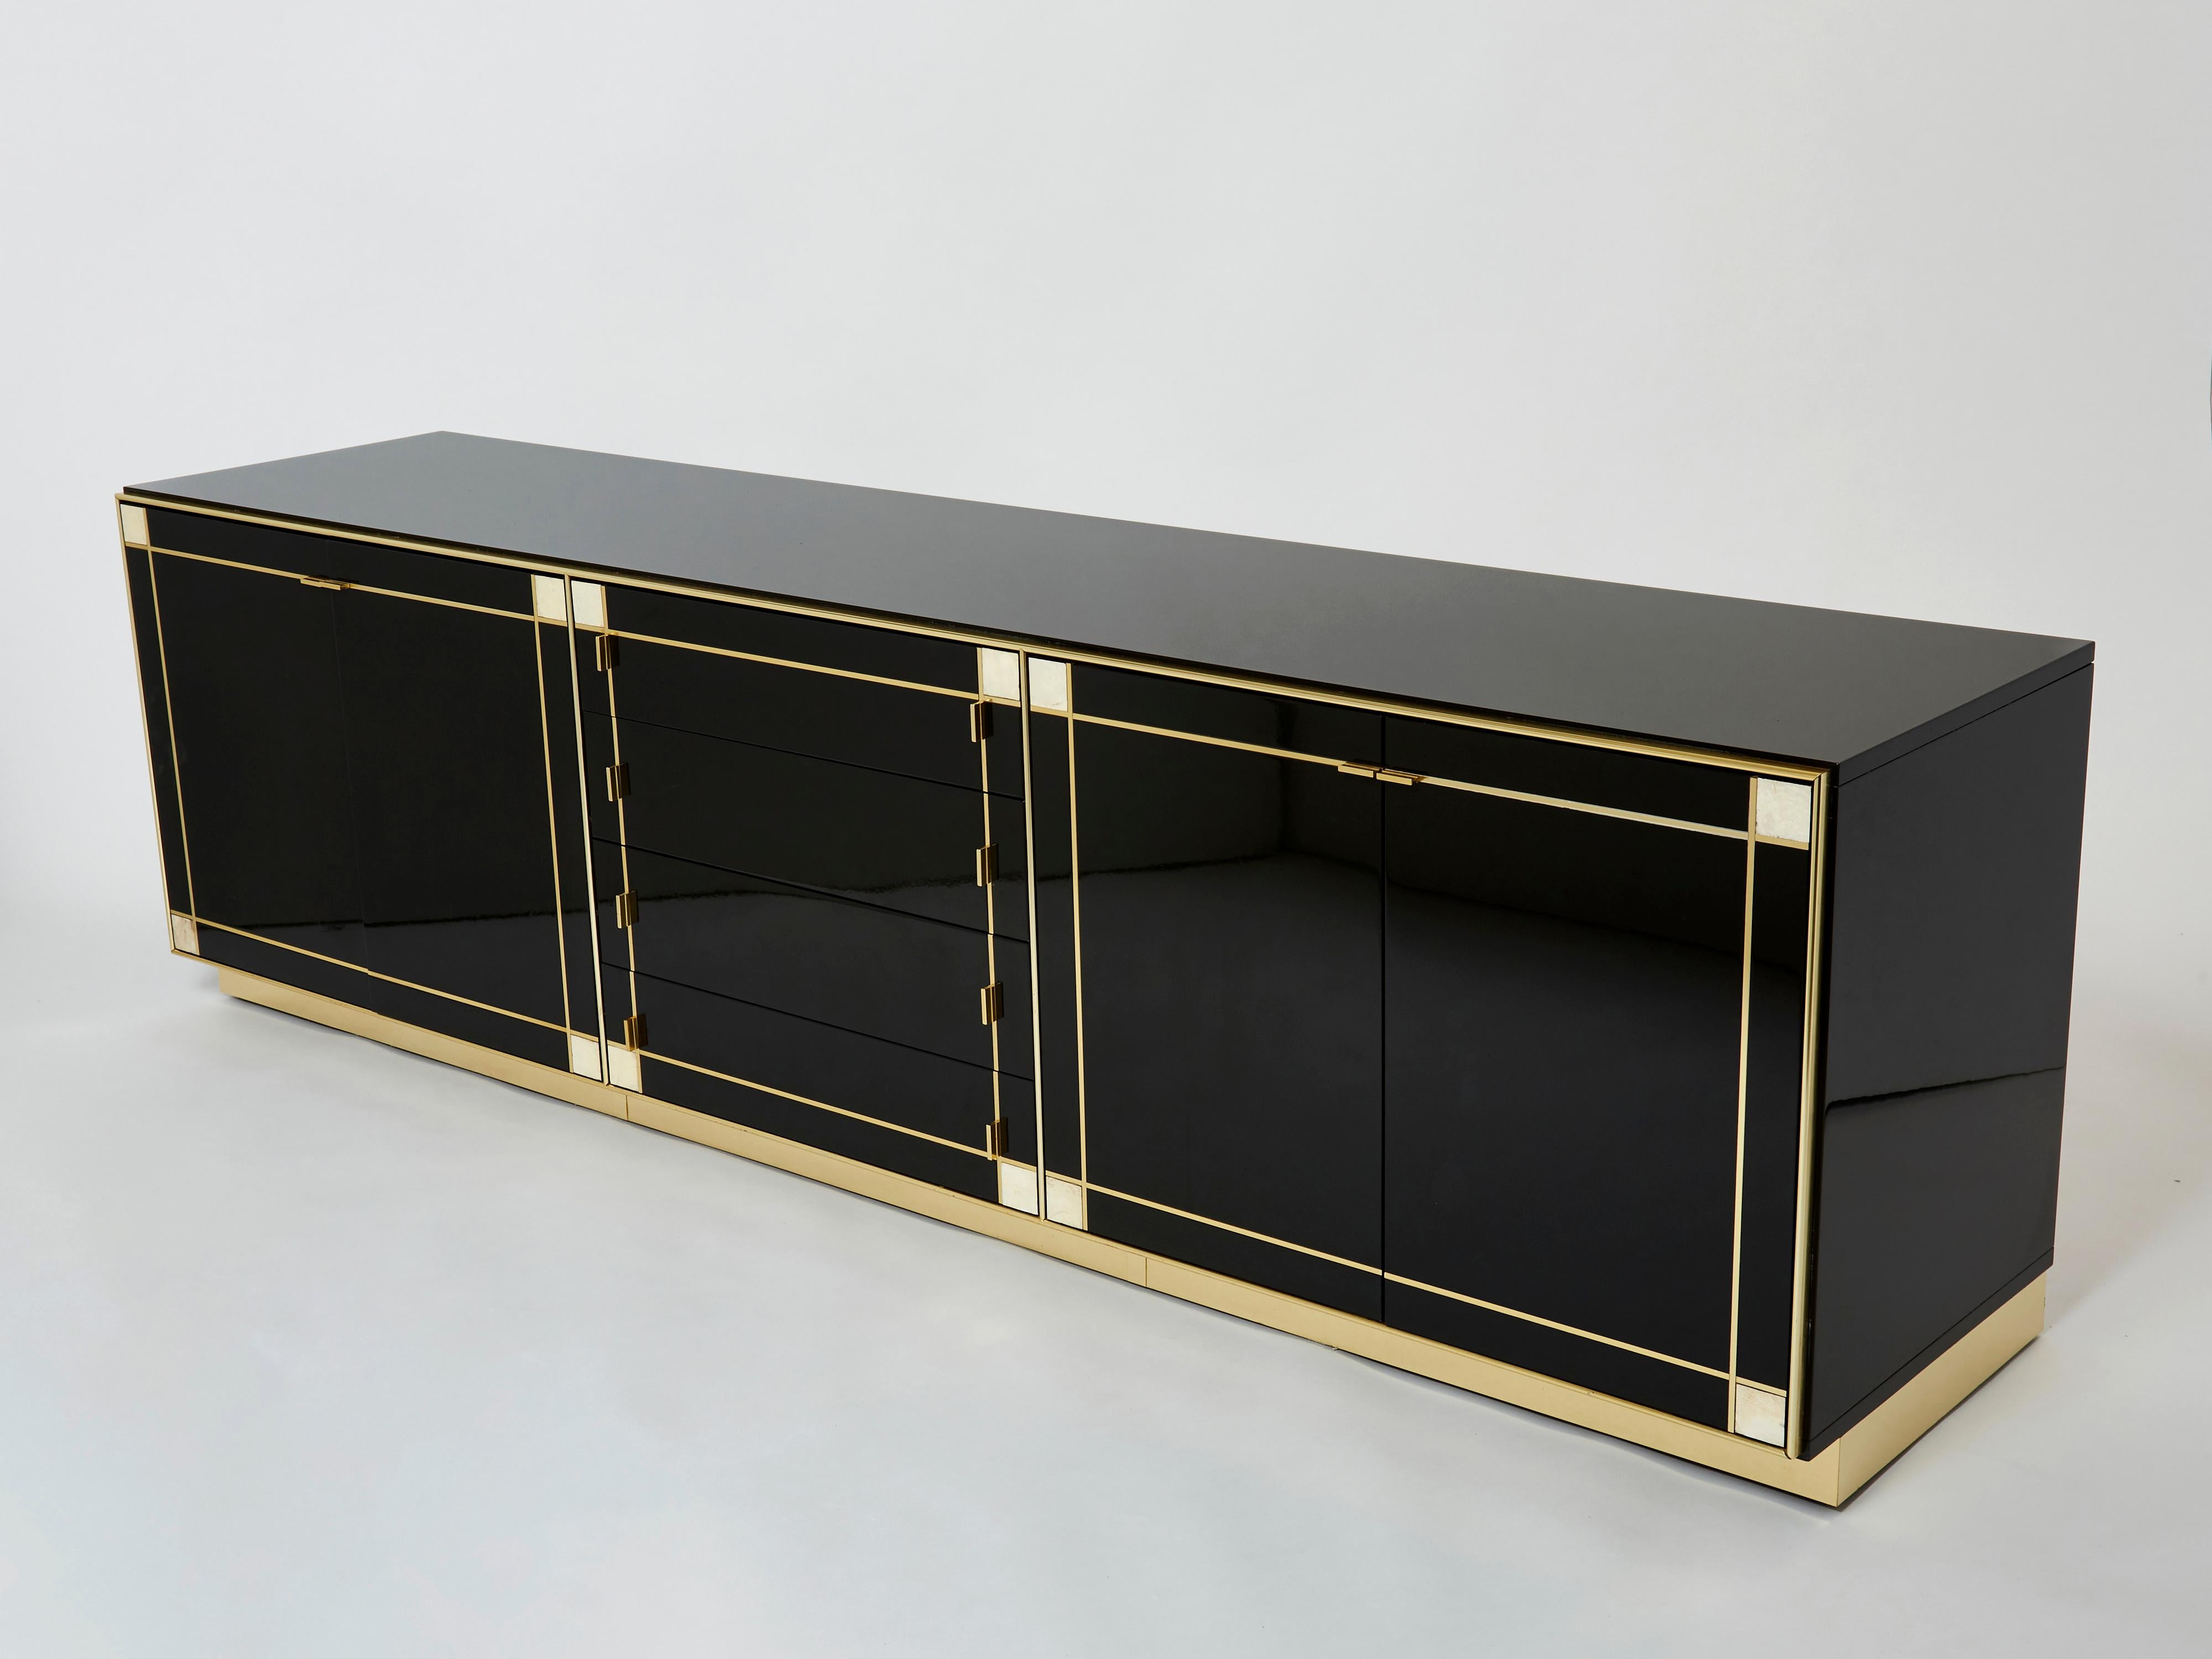 A unique and timeless Pierre Cardin vintage piece, this French midcentury sideboard feels imposing and glamourous, with thick, straight lines of brass adorning its exterior of reflective black lacquer. Glossy black lacquer, paired with bright brass